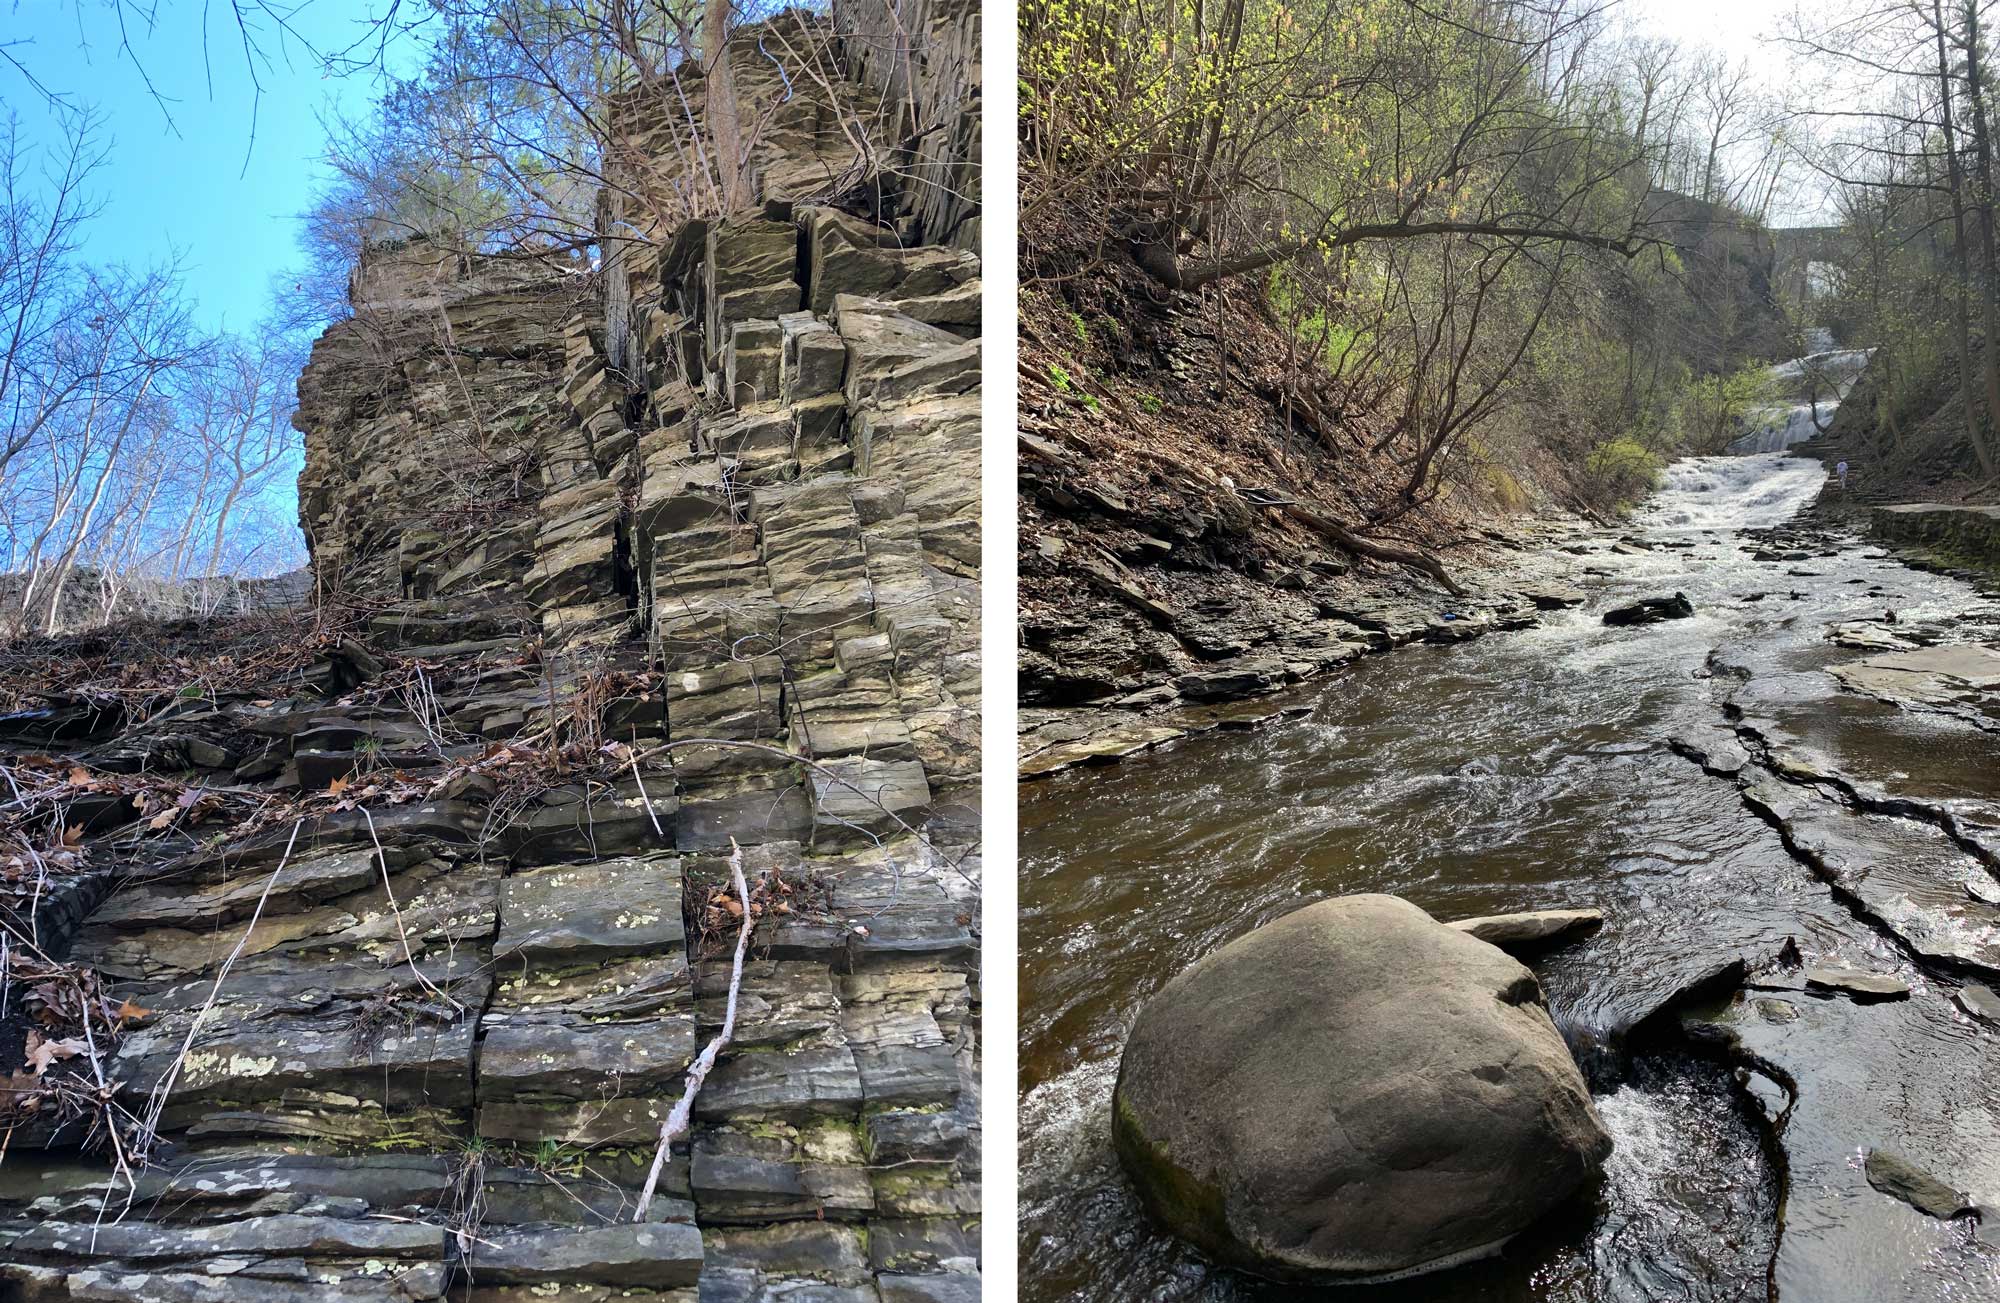 Two photographs showing cracks called joints in Cascadilla Gorge and a glacial erratic boulder in Cascadilla Creek.